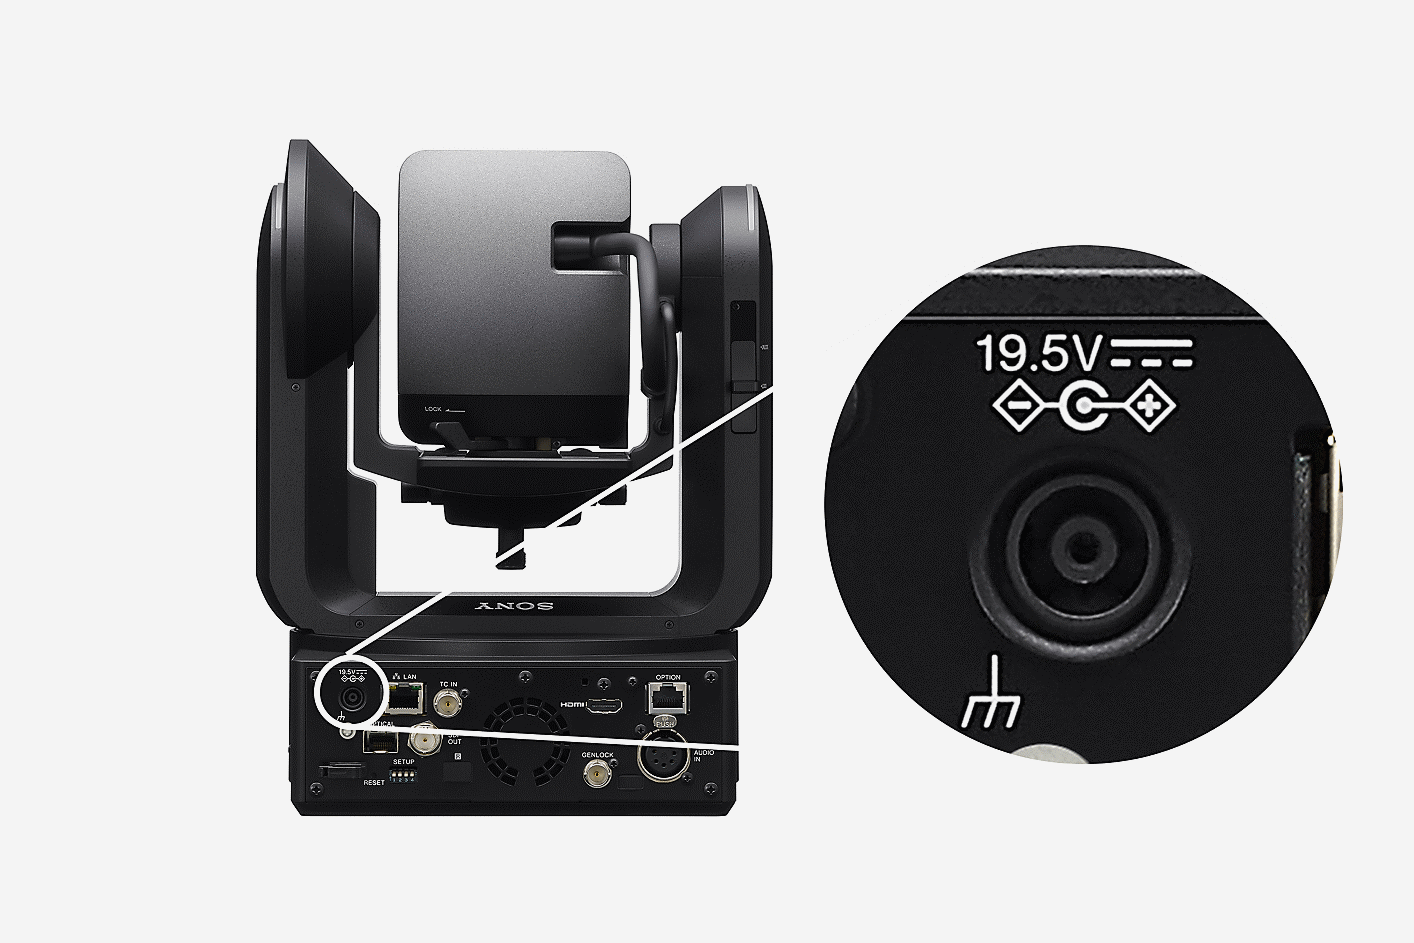 Product image of the FR7, featuring DC IN connector